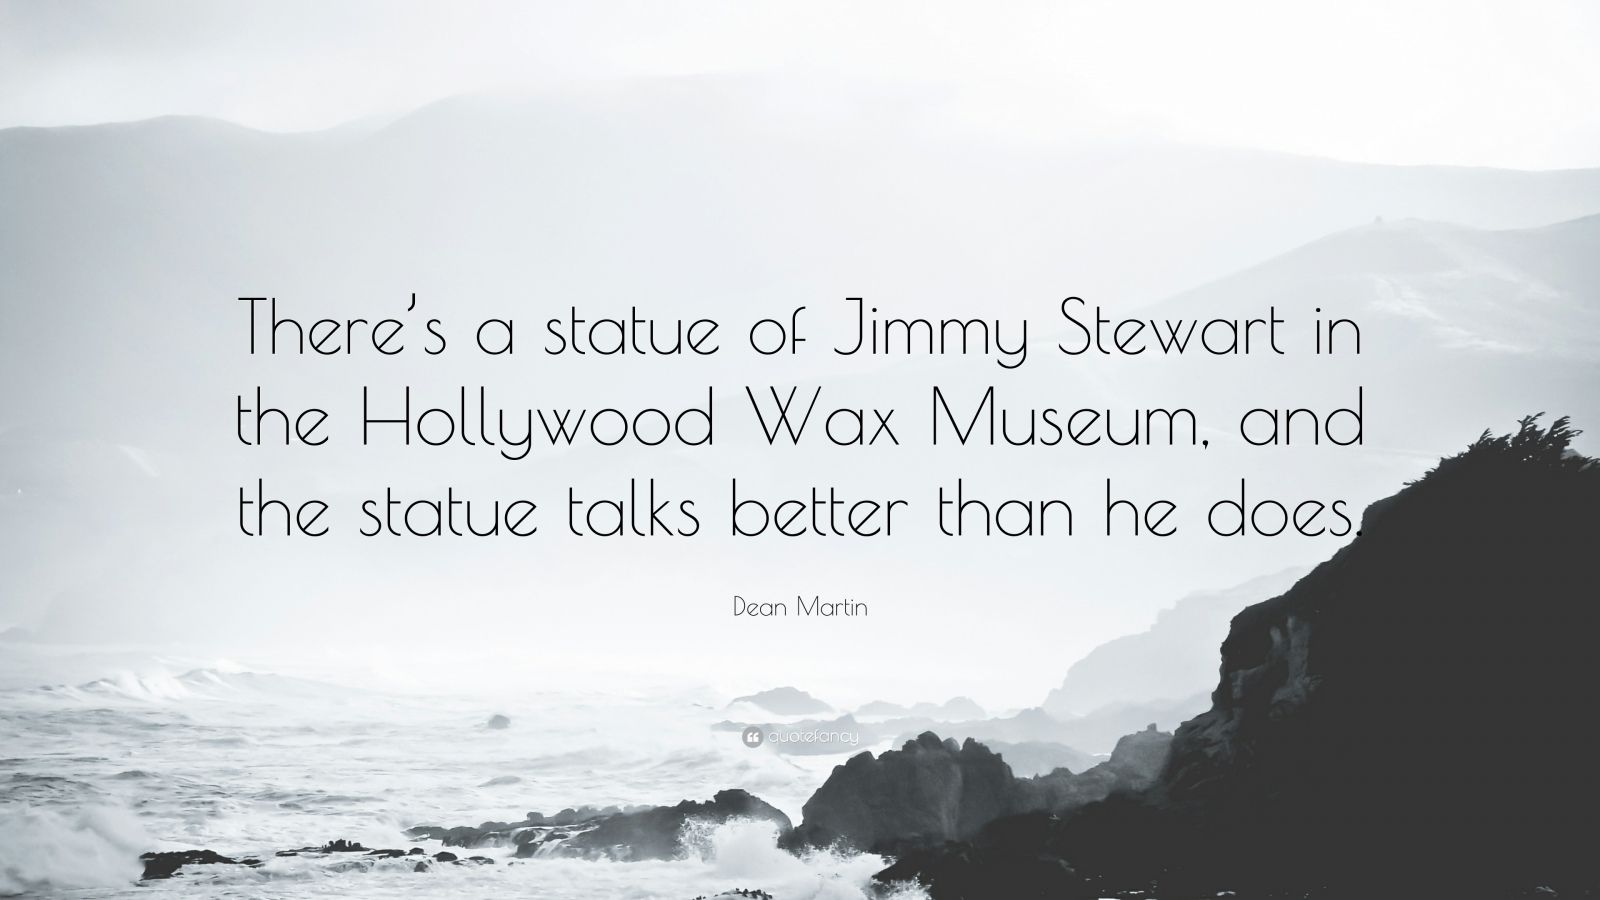 Dean Martin Quote: “There’s a statue of Jimmy Stewart in the Hollywood Wax Museum, and the statue talks better than he does.”